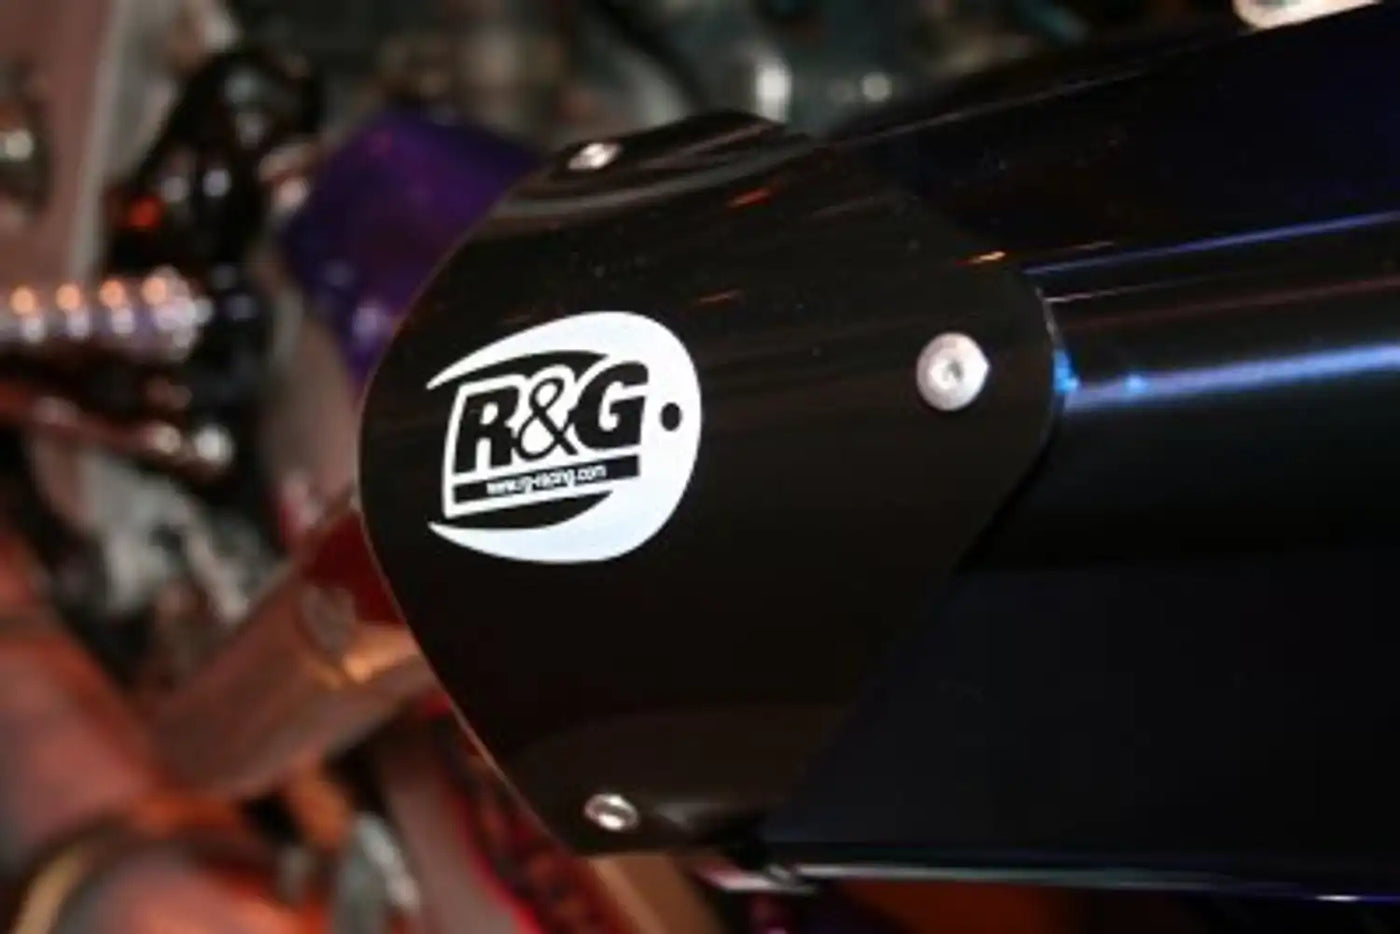 Tri Oval Exhaust Protector (Can Cover)